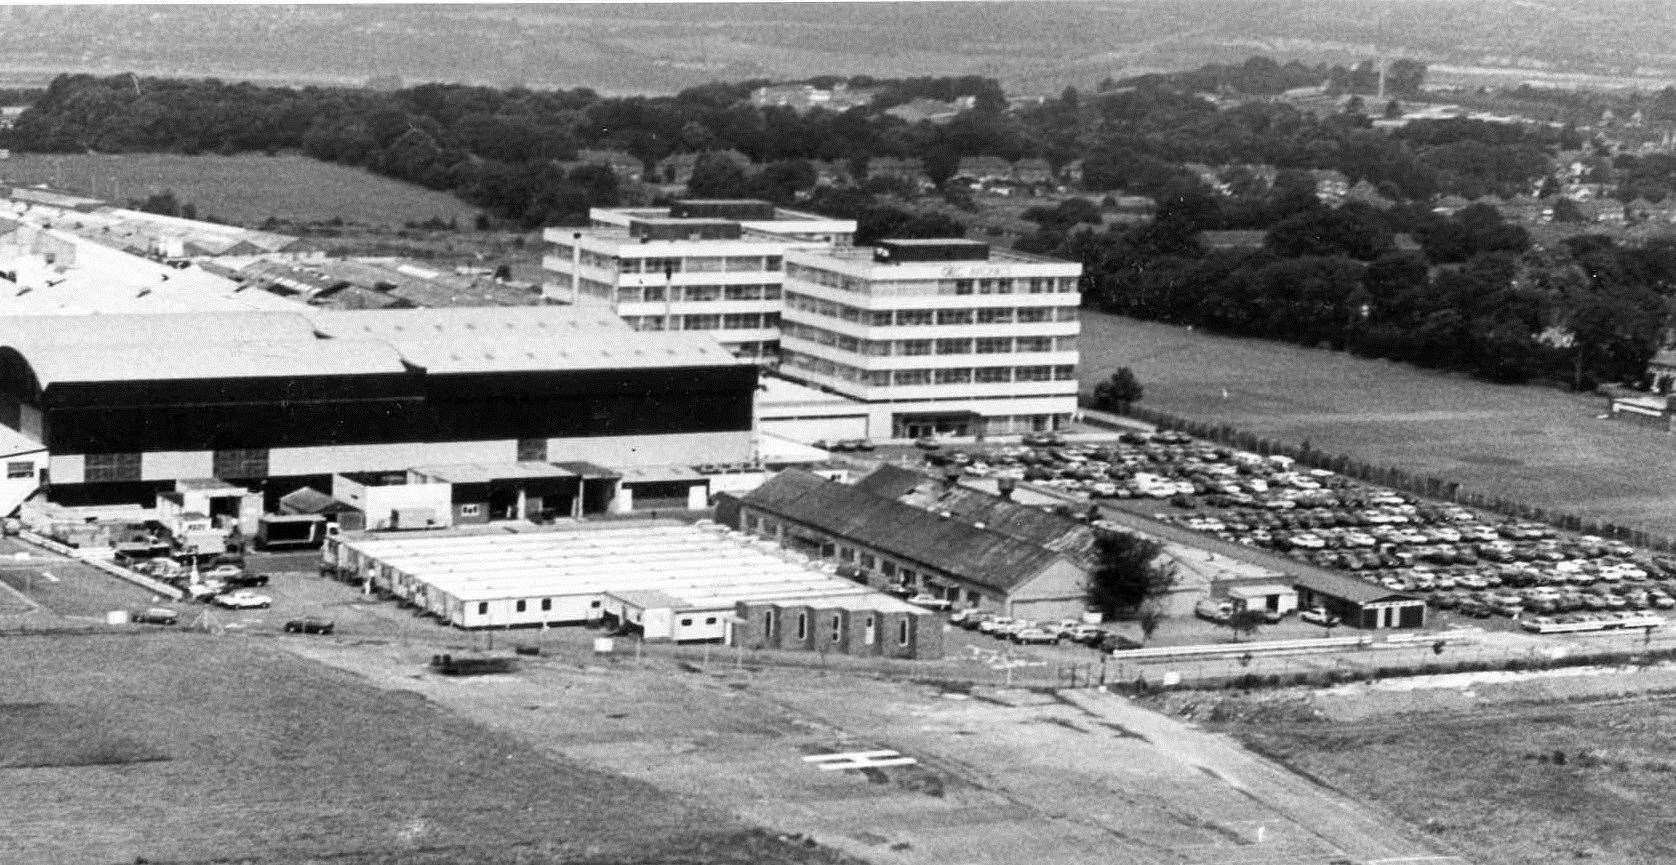 The GEC Avionics factory at Rochester Airport, now BAE Systems, pictured in December 1986